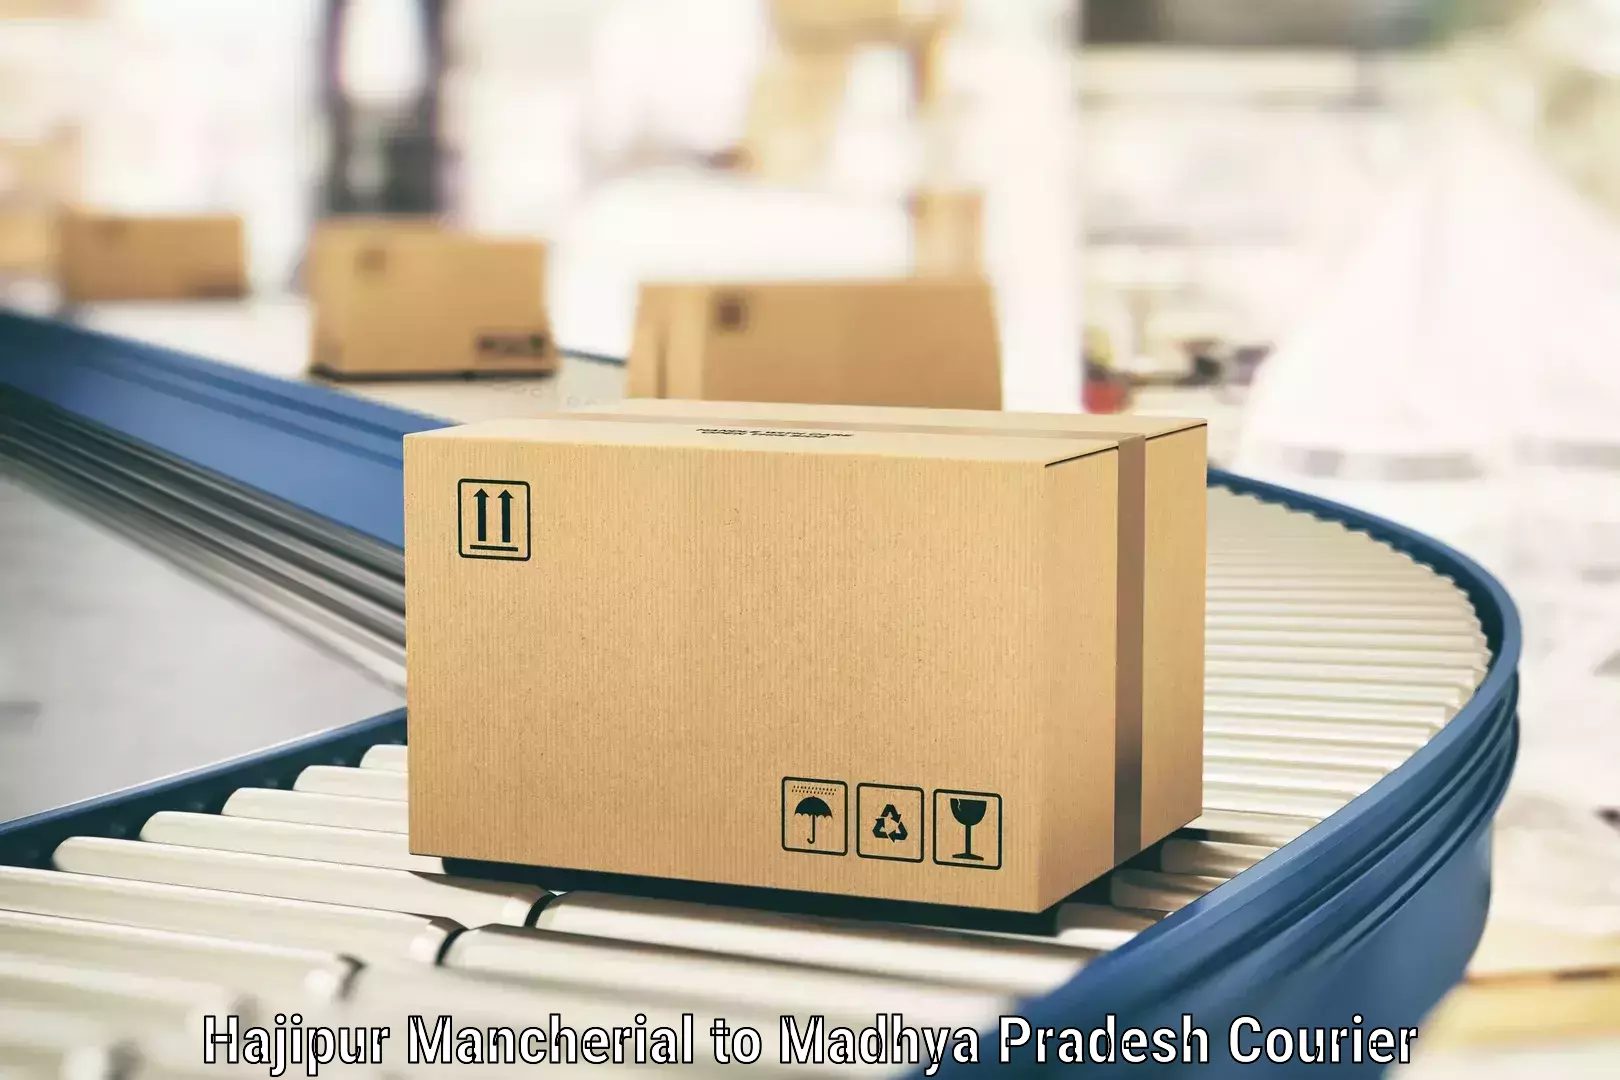 Parcel handling and care in Hajipur Mancherial to Mandideep